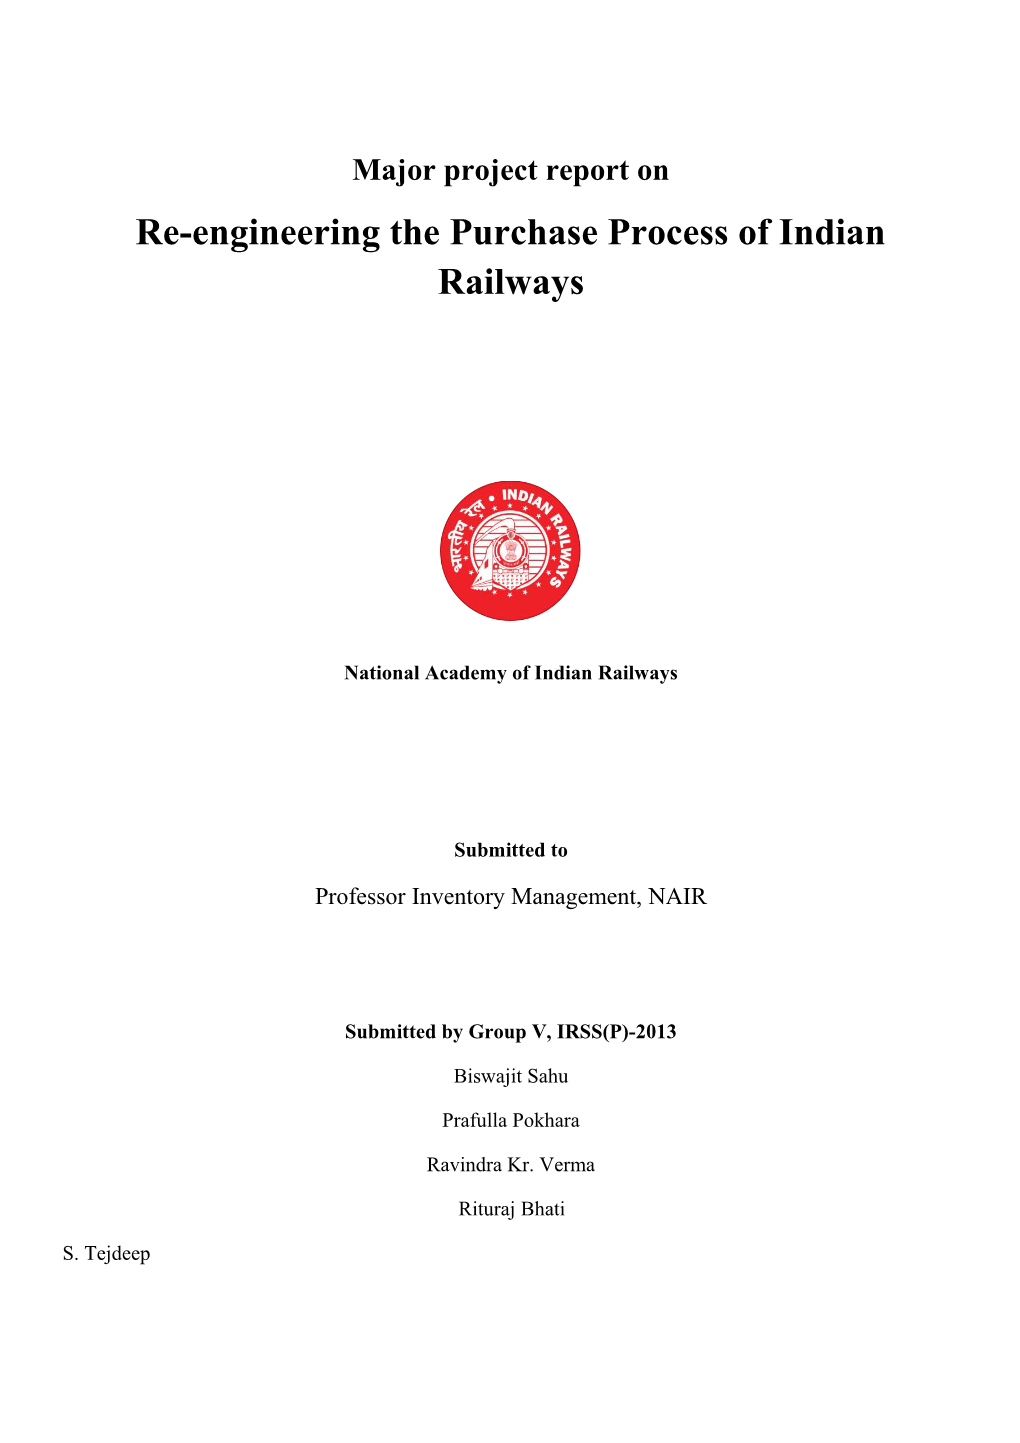 Re-Engineering the Purchase Process of Indian Railways